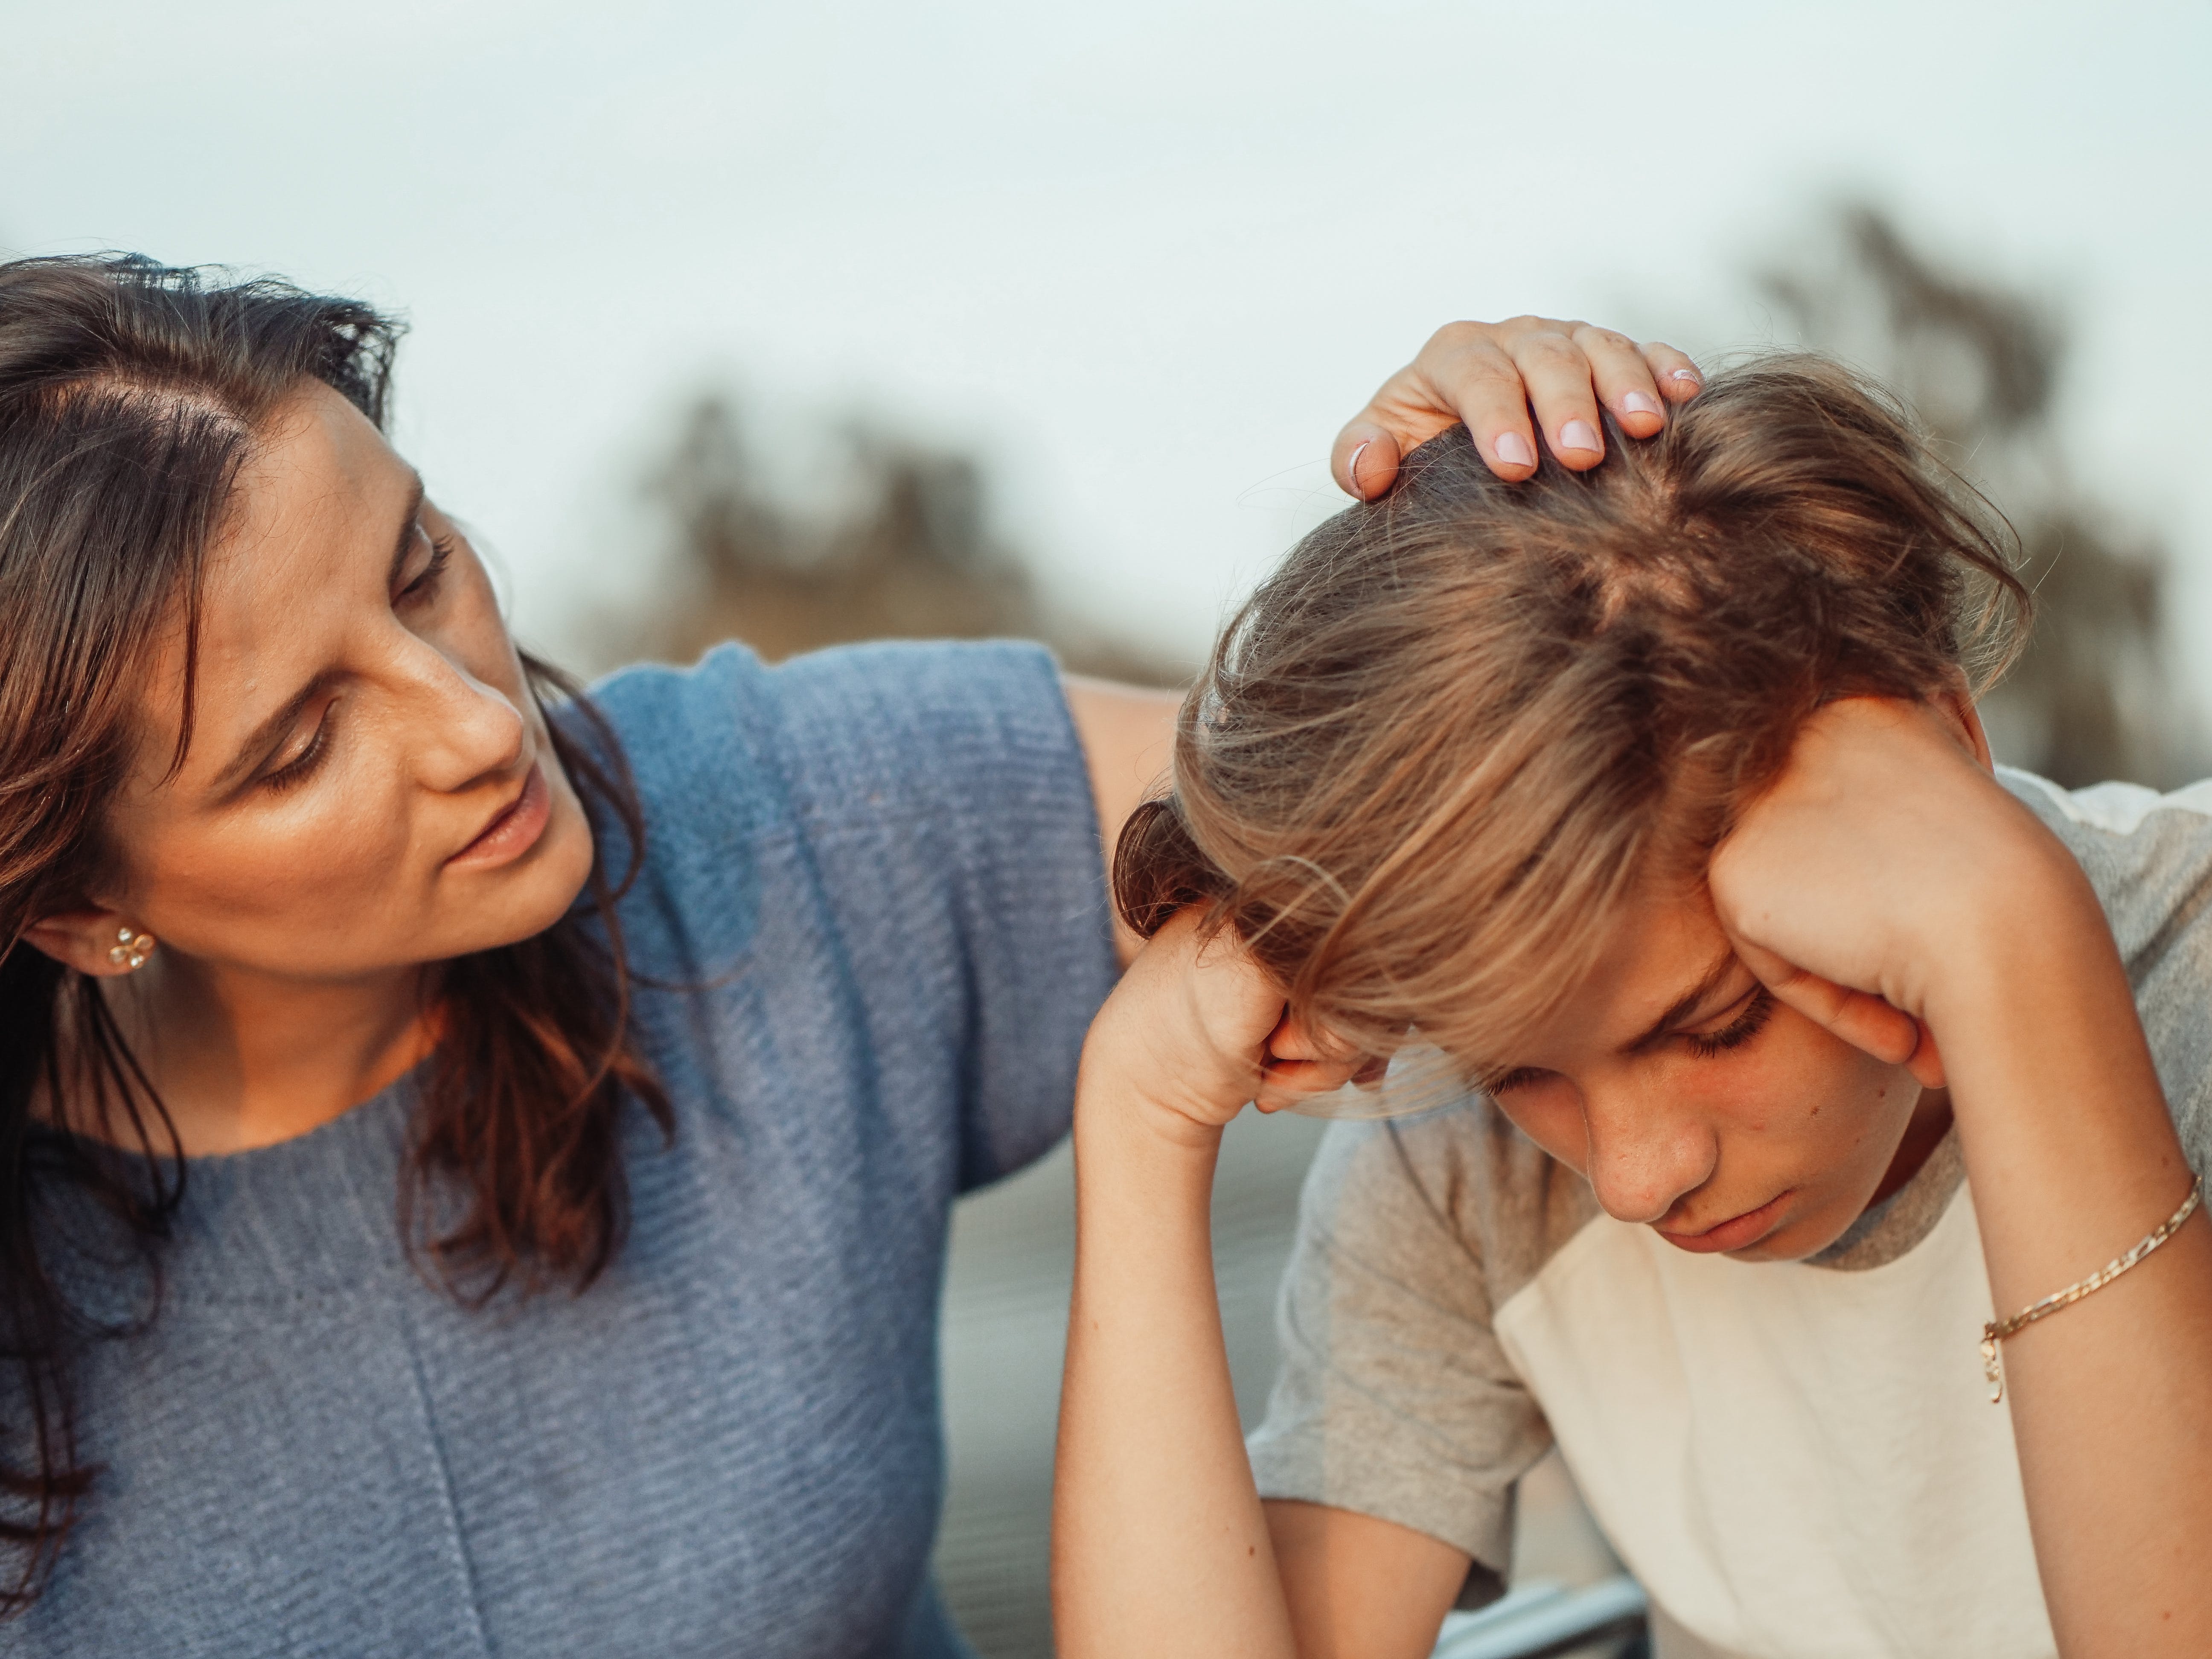 A woman comforting a young boy | Source: Pexels